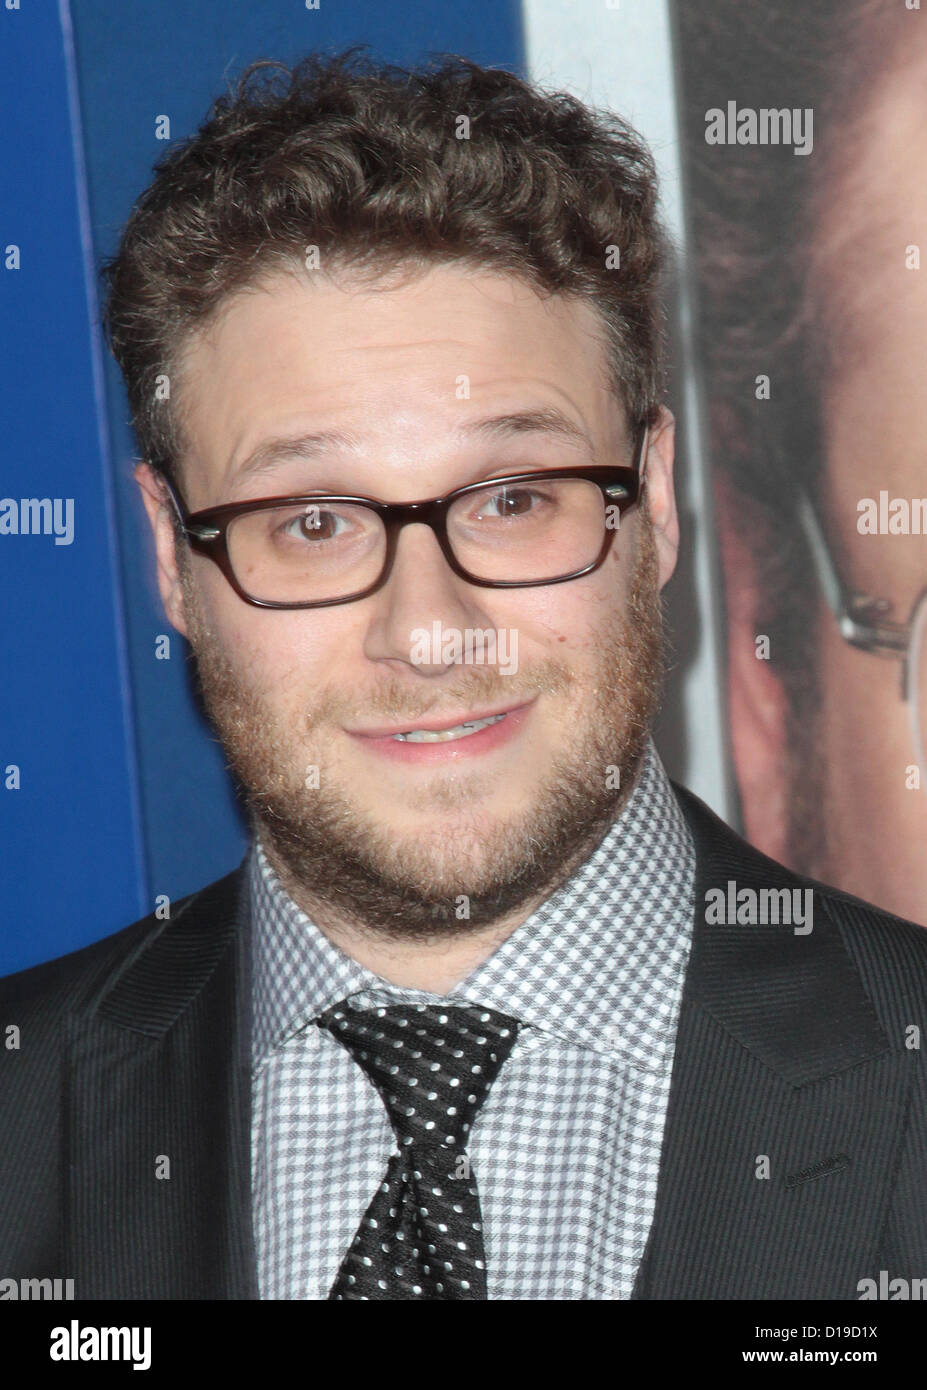 SETH ROGEN LOS ANGELES PREMIERE OF THE GUILT TRIP WESTWOOD CALIFORNIA USA 11 December 2012 Stock Photo